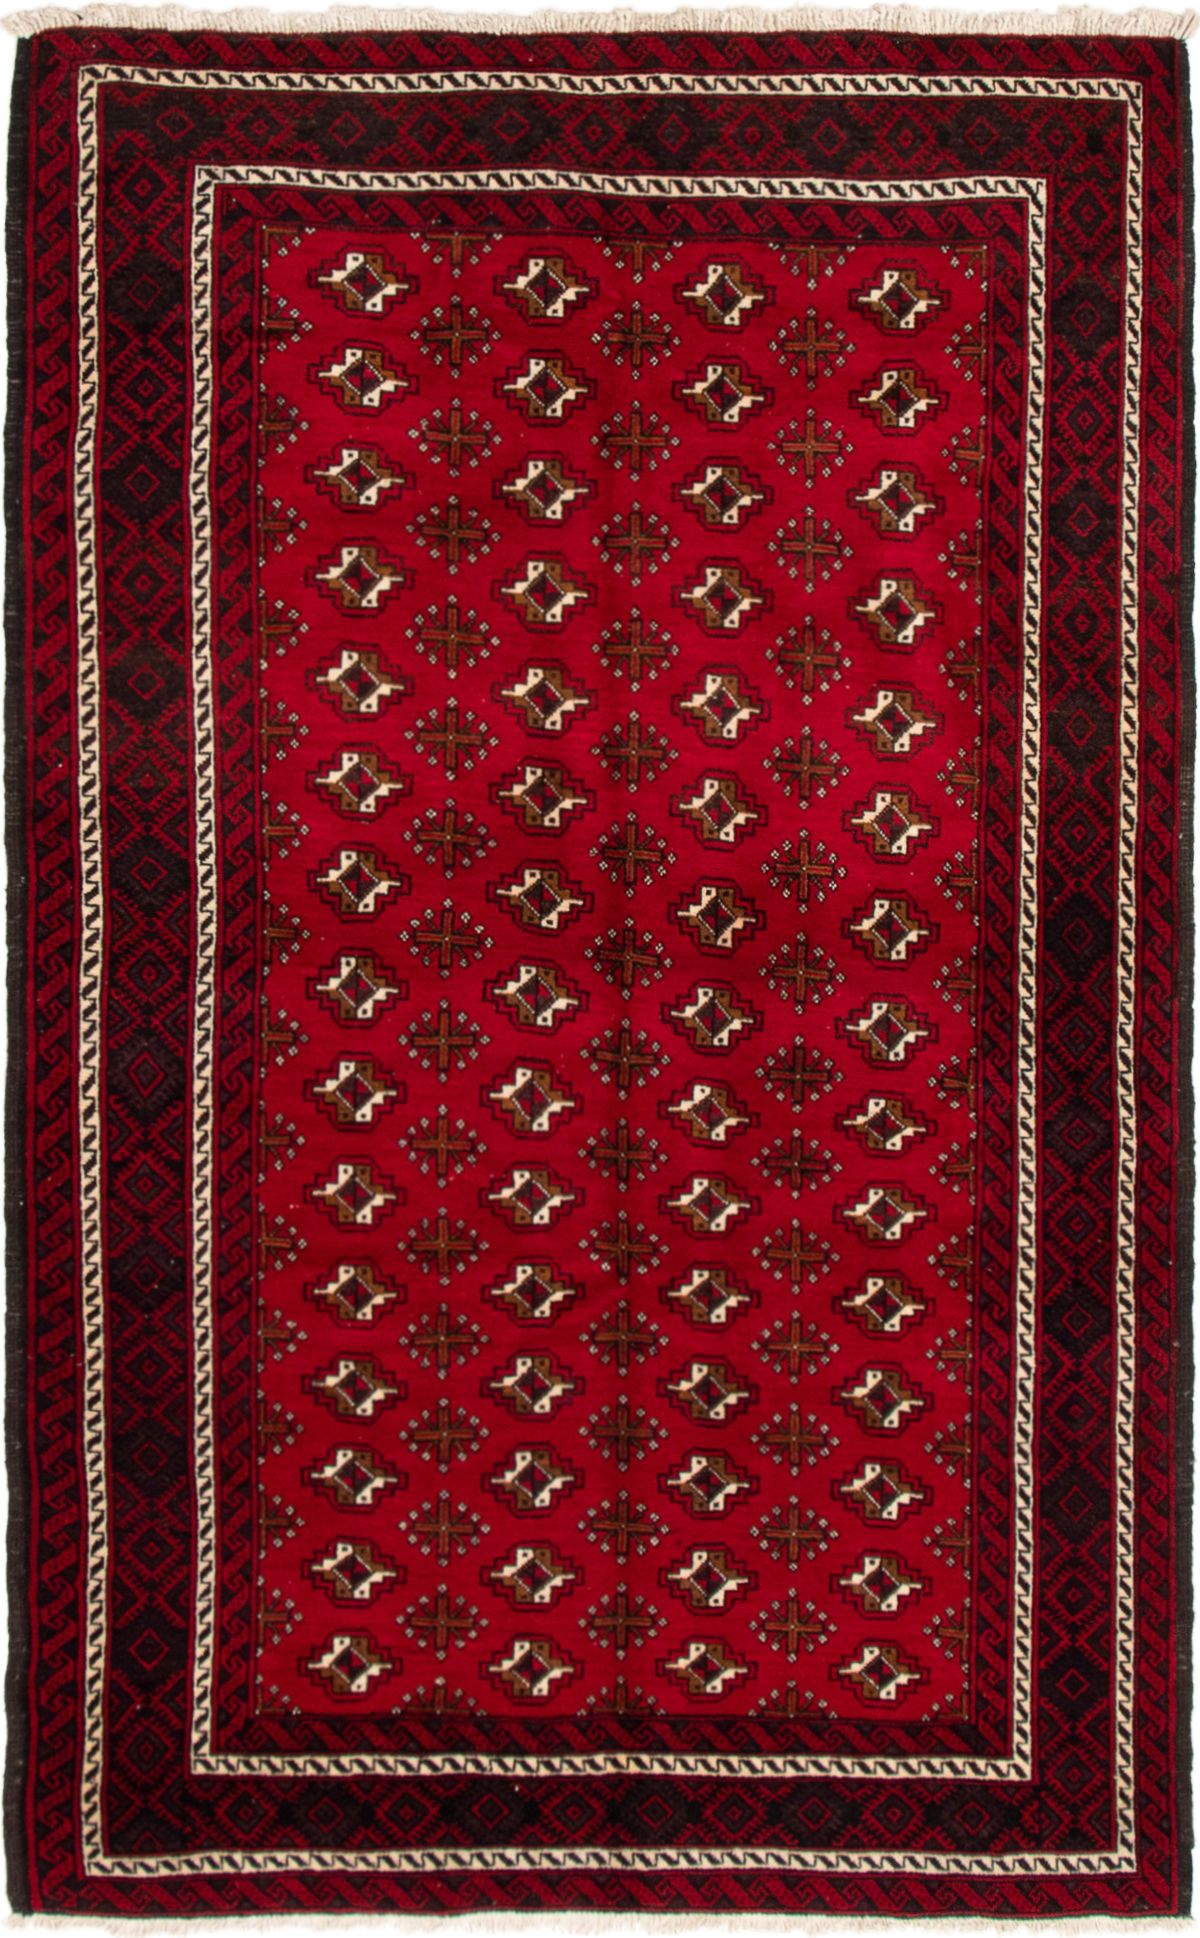 Hand-knotted Khal Mohammadi Dark Red Wool Rug 4'5" x 7'3" Size: 4'5" x 7'3"  